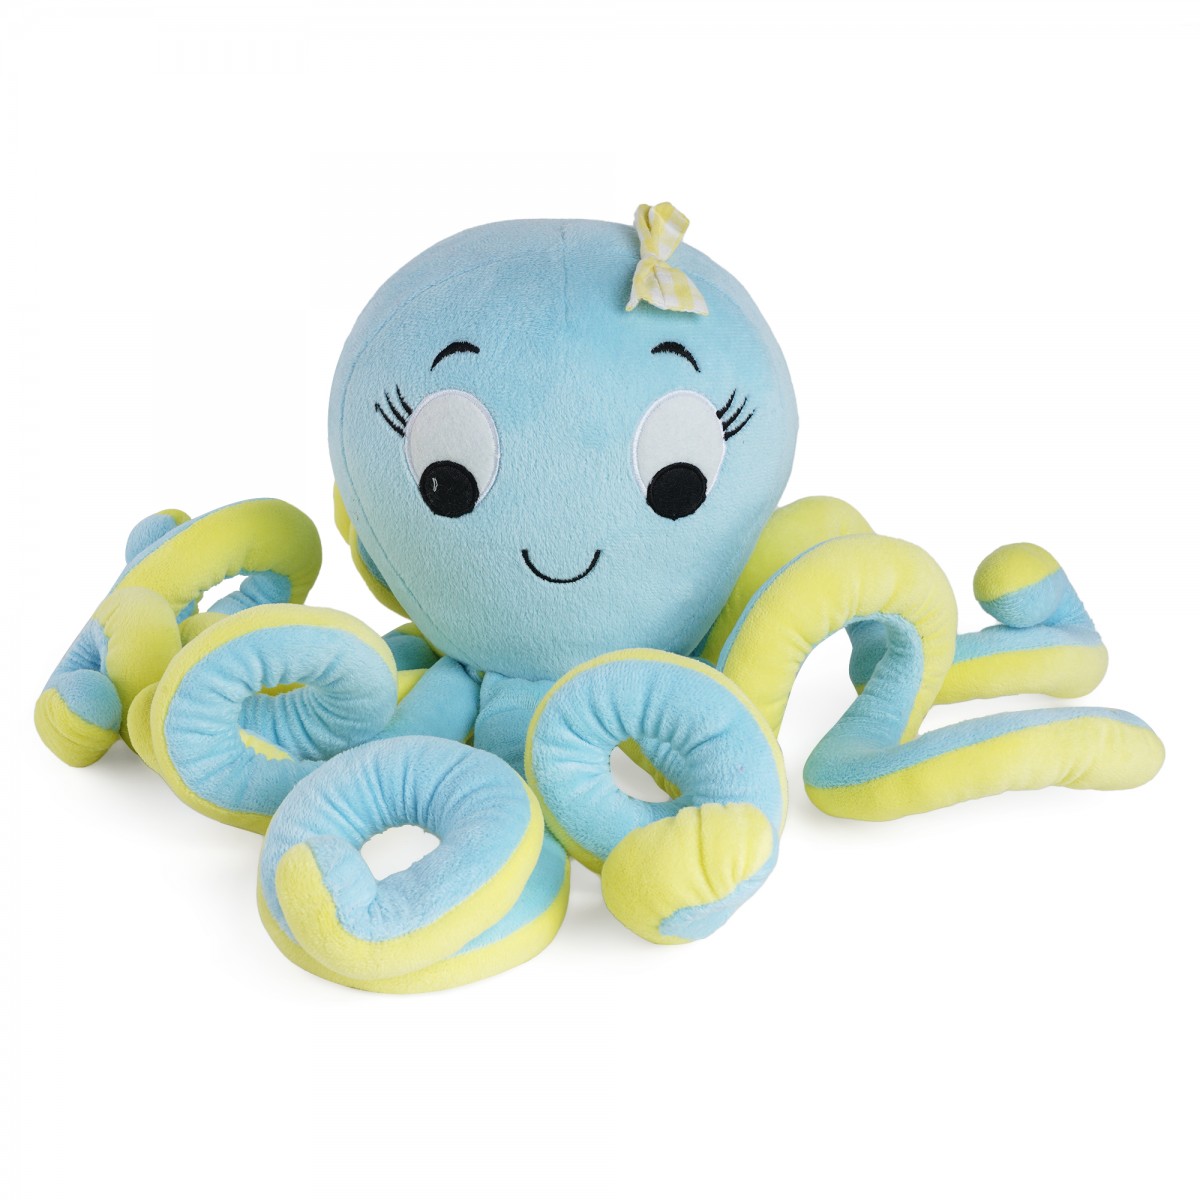 Huggable Cuddly Octopus Stuffed Toy By Fuzzbuzz, Soft Toys for Kids, Cute Plushies Blue, For Kids Of Age 2 Years & Above